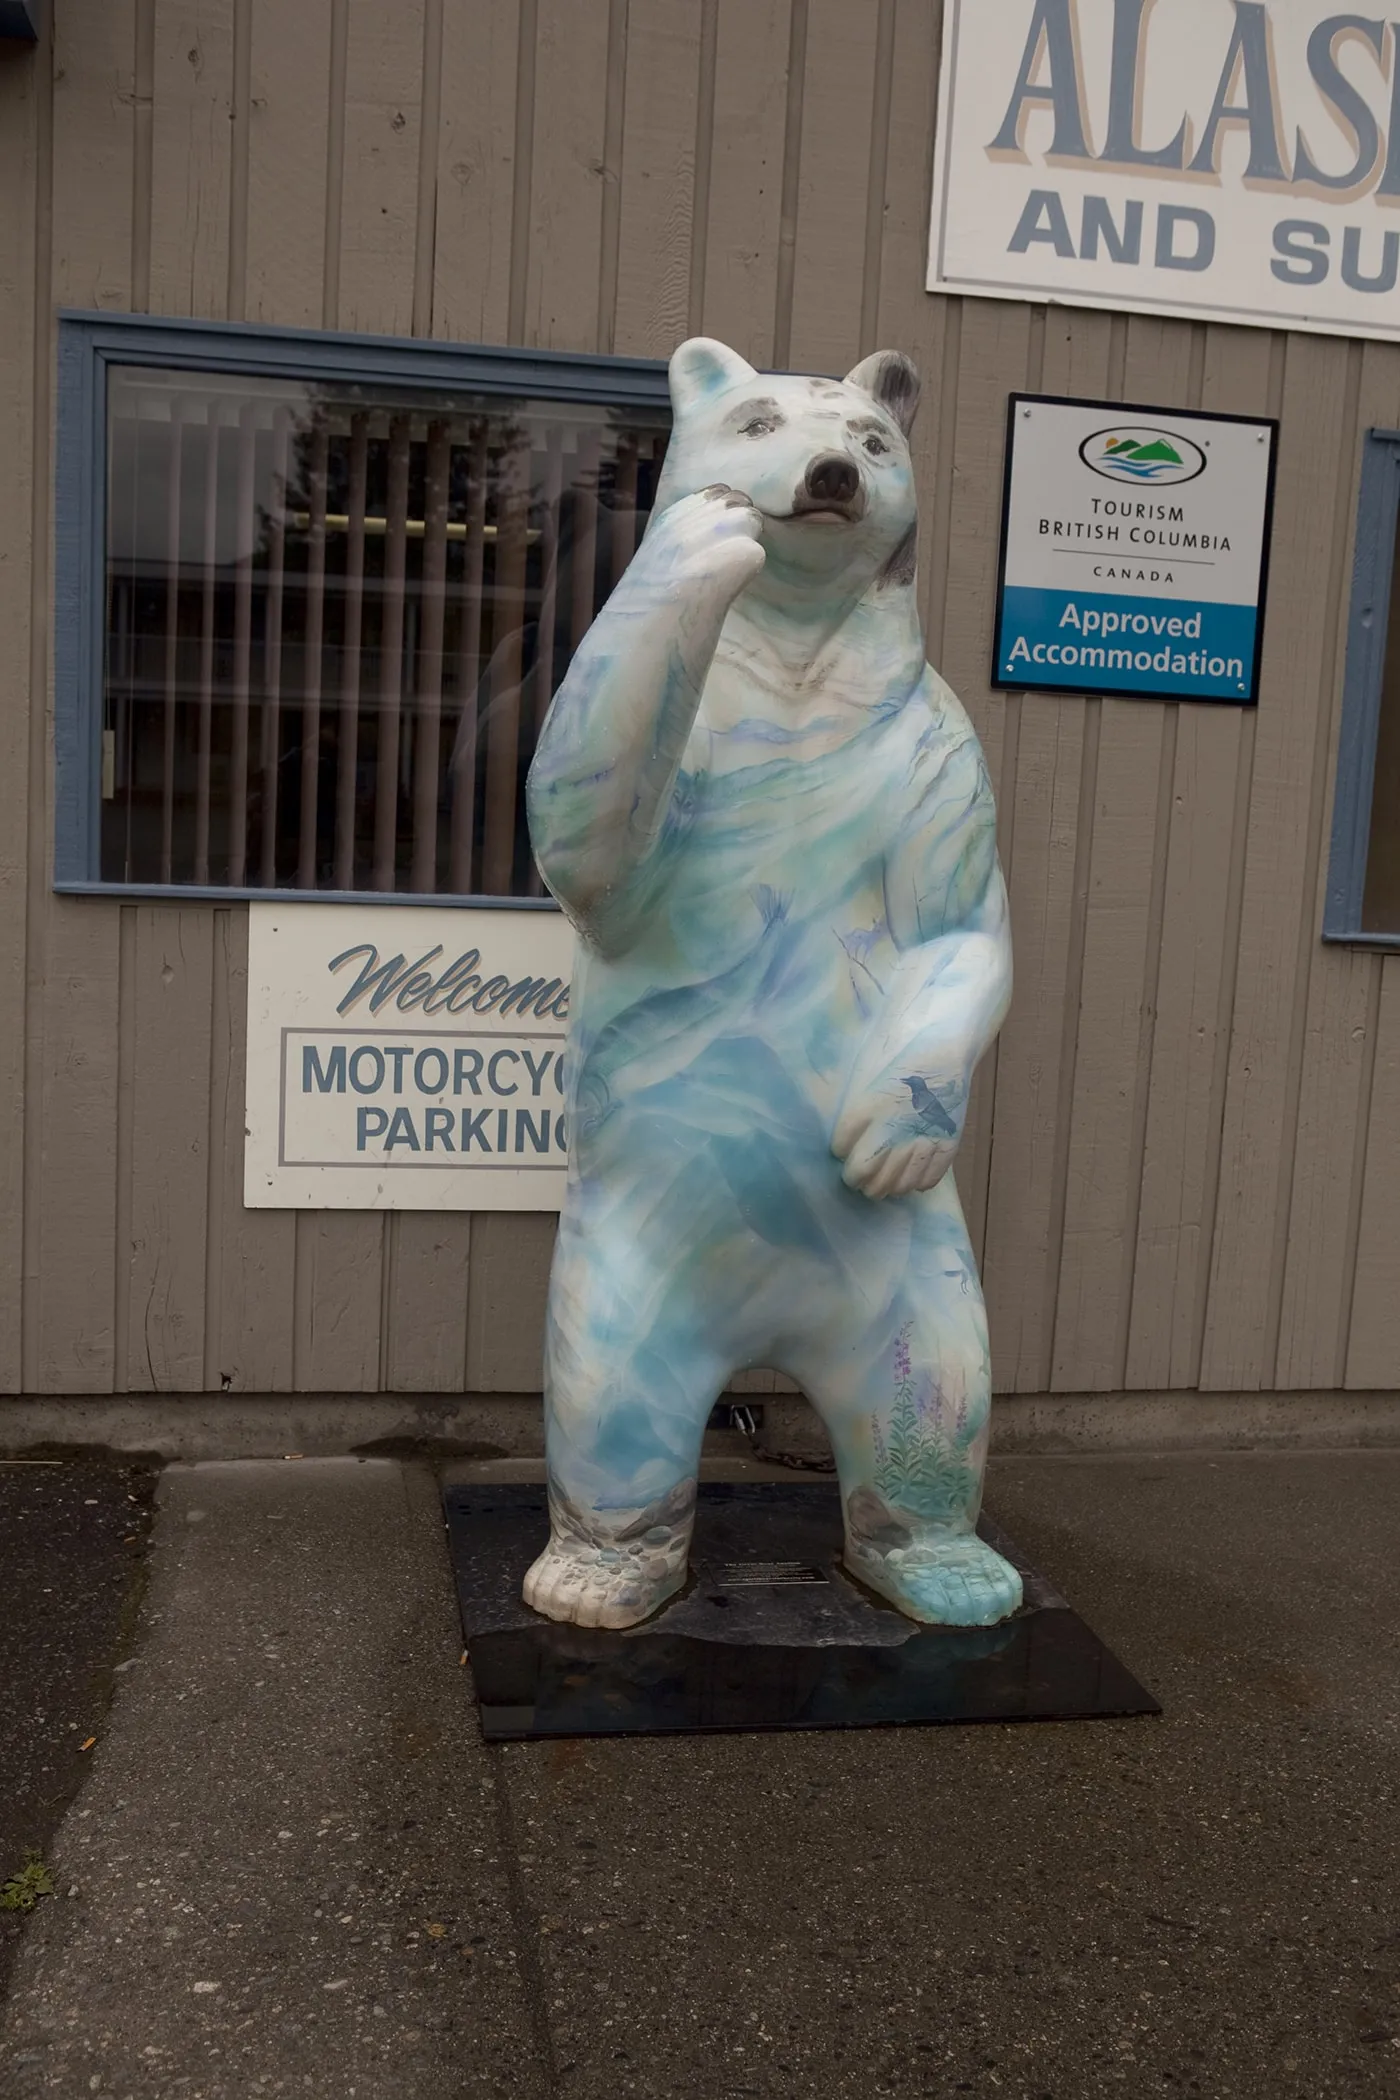 Painted polar bear in front of King Edward's Lounge in Stewart, British Columbia, Canada.